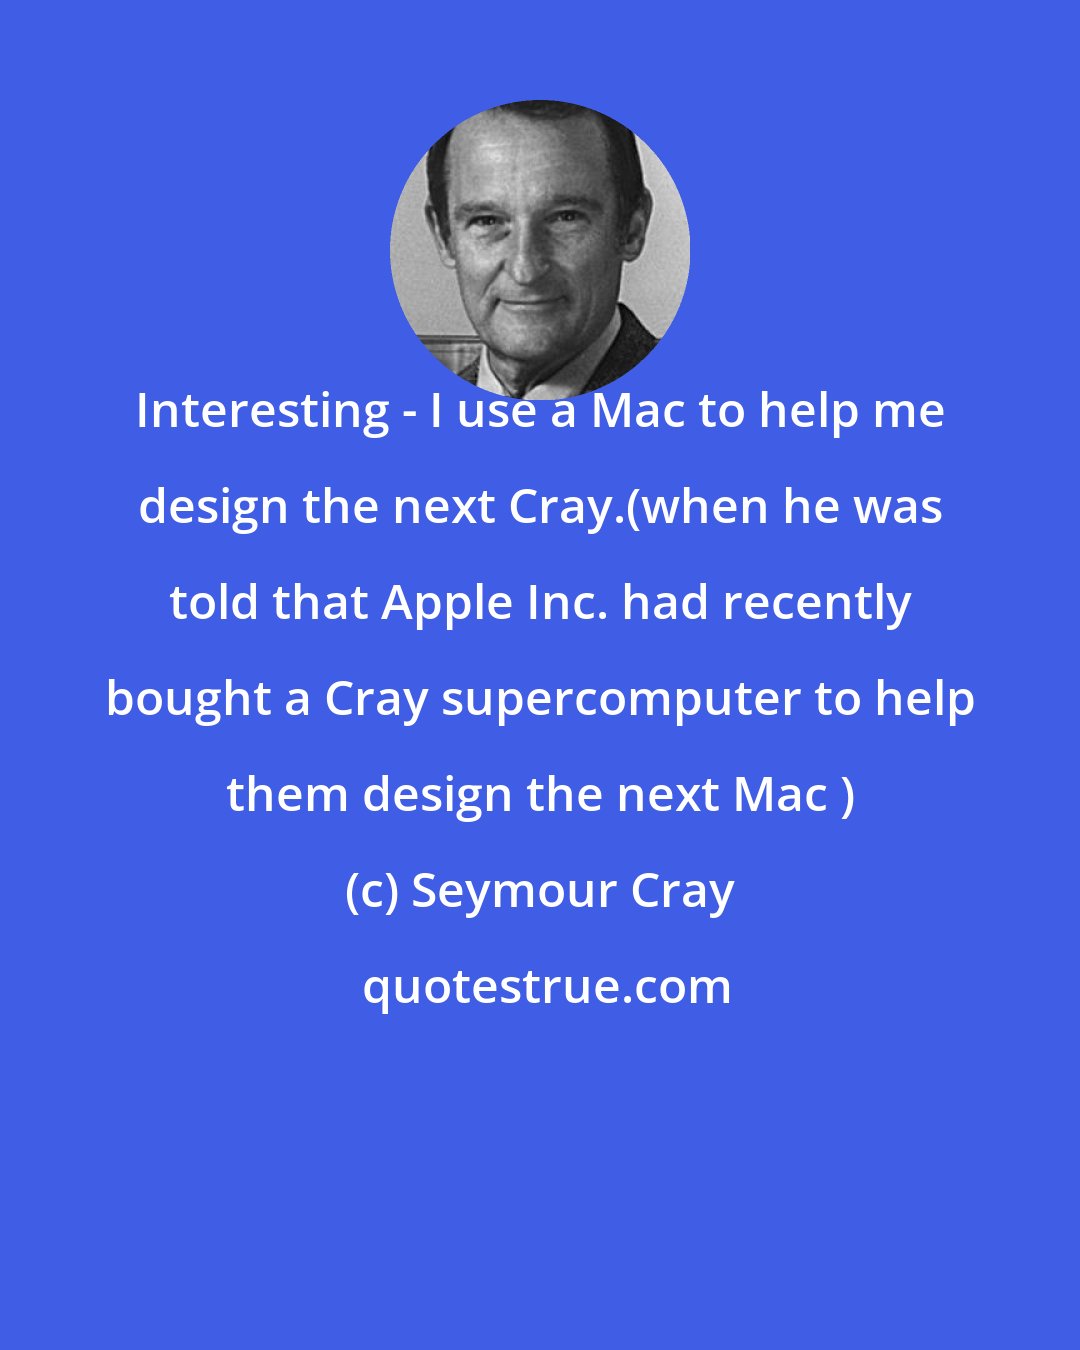 Seymour Cray: Interesting - I use a Mac to help me design the next Cray.(when he was told that Apple Inc. had recently bought a Cray supercomputer to help them design the next Mac )